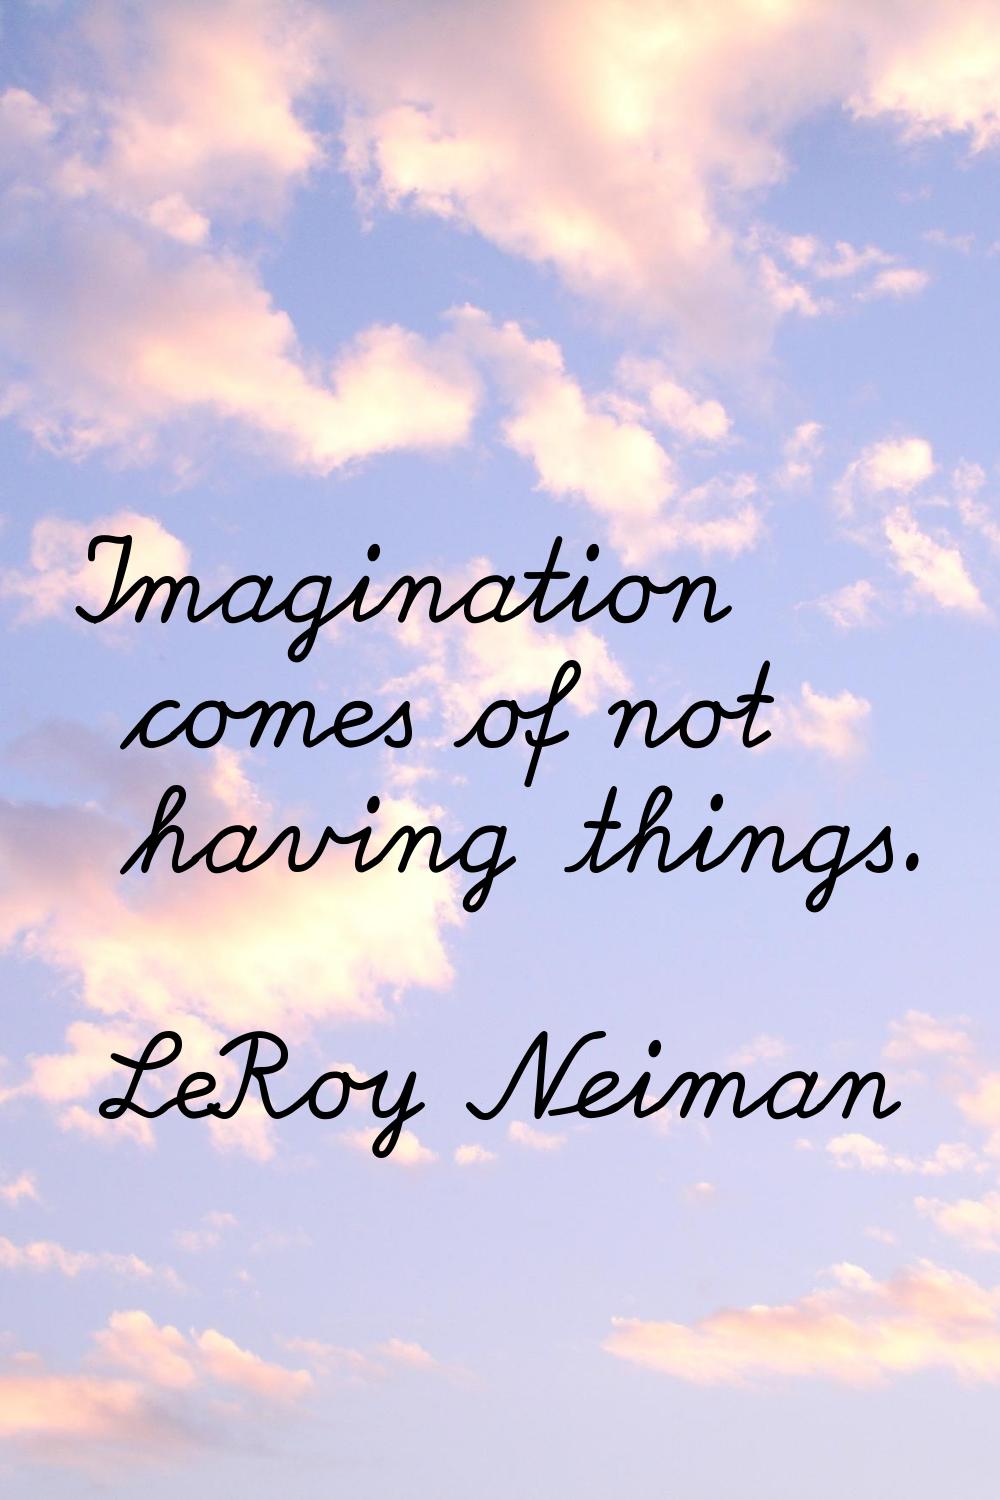 Imagination comes of not having things.